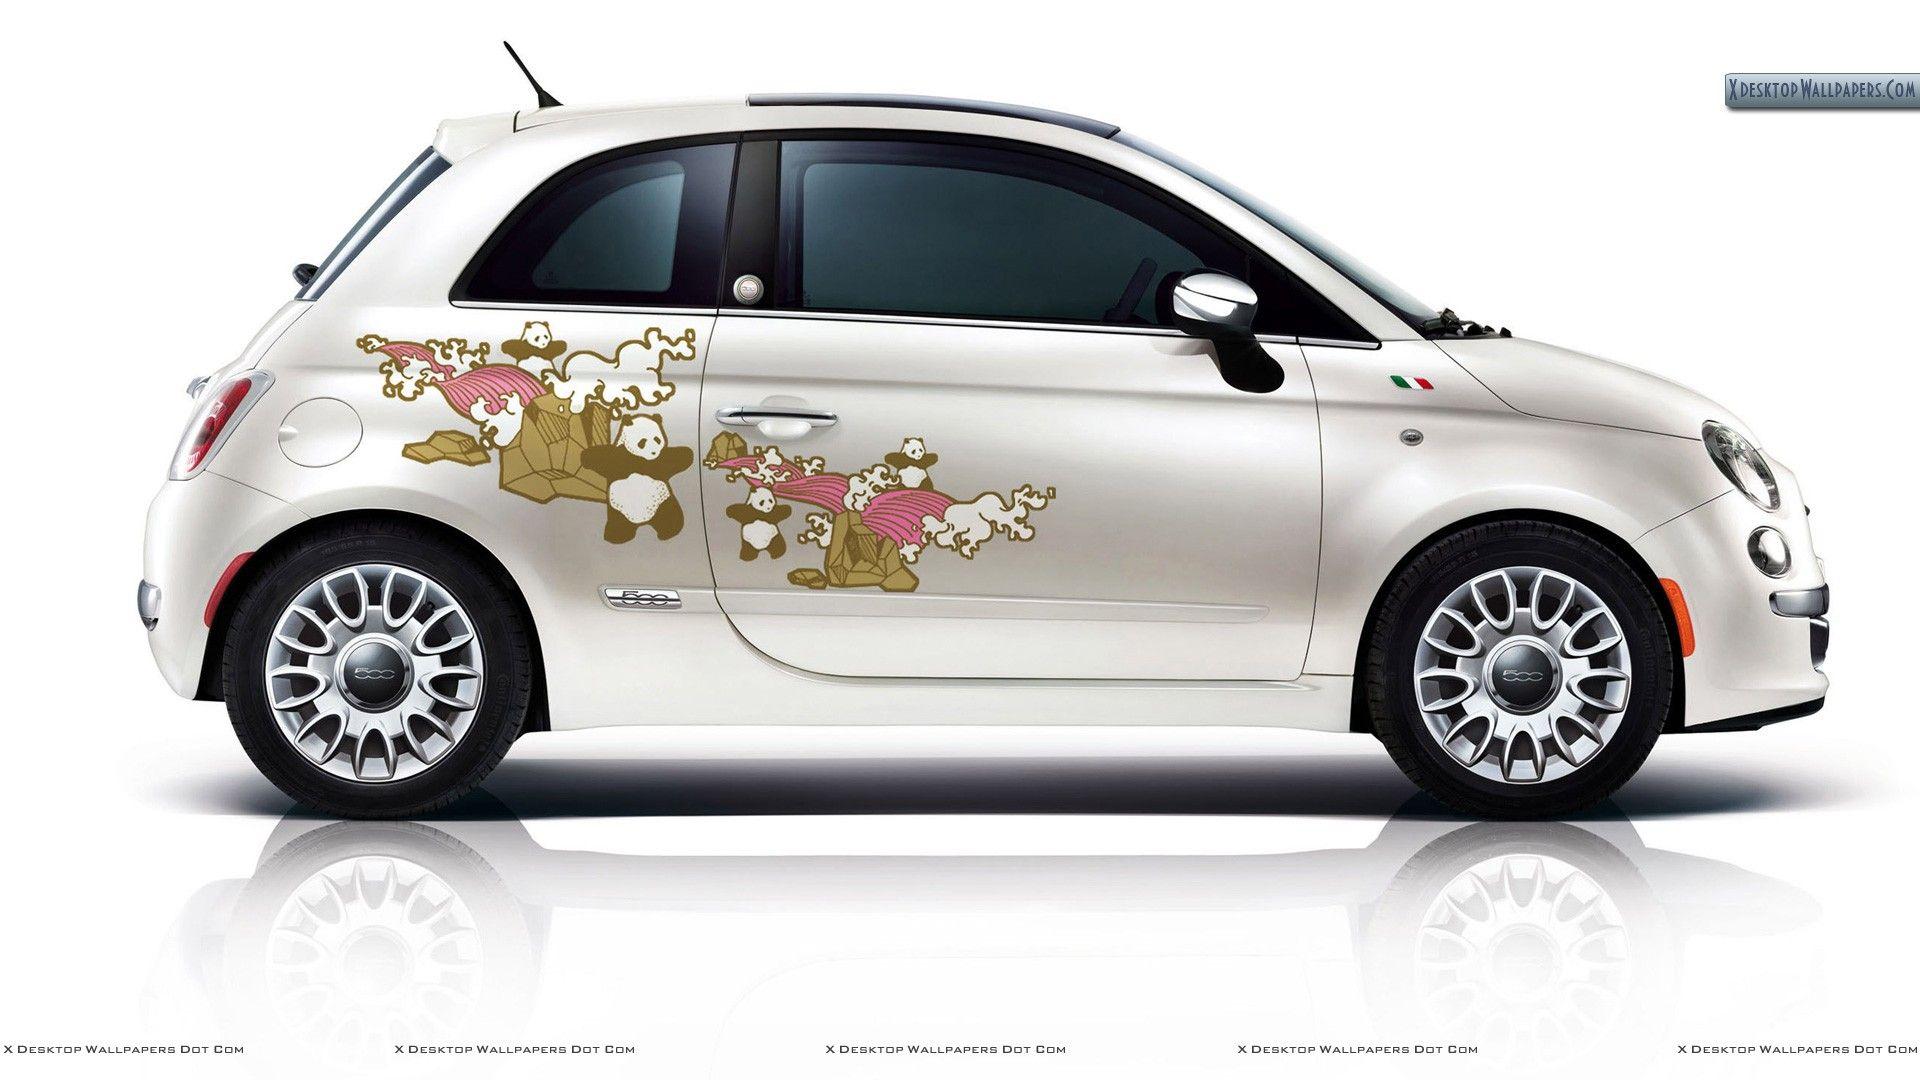 Fiat First Edition – Graphic Design in White Wallpapers